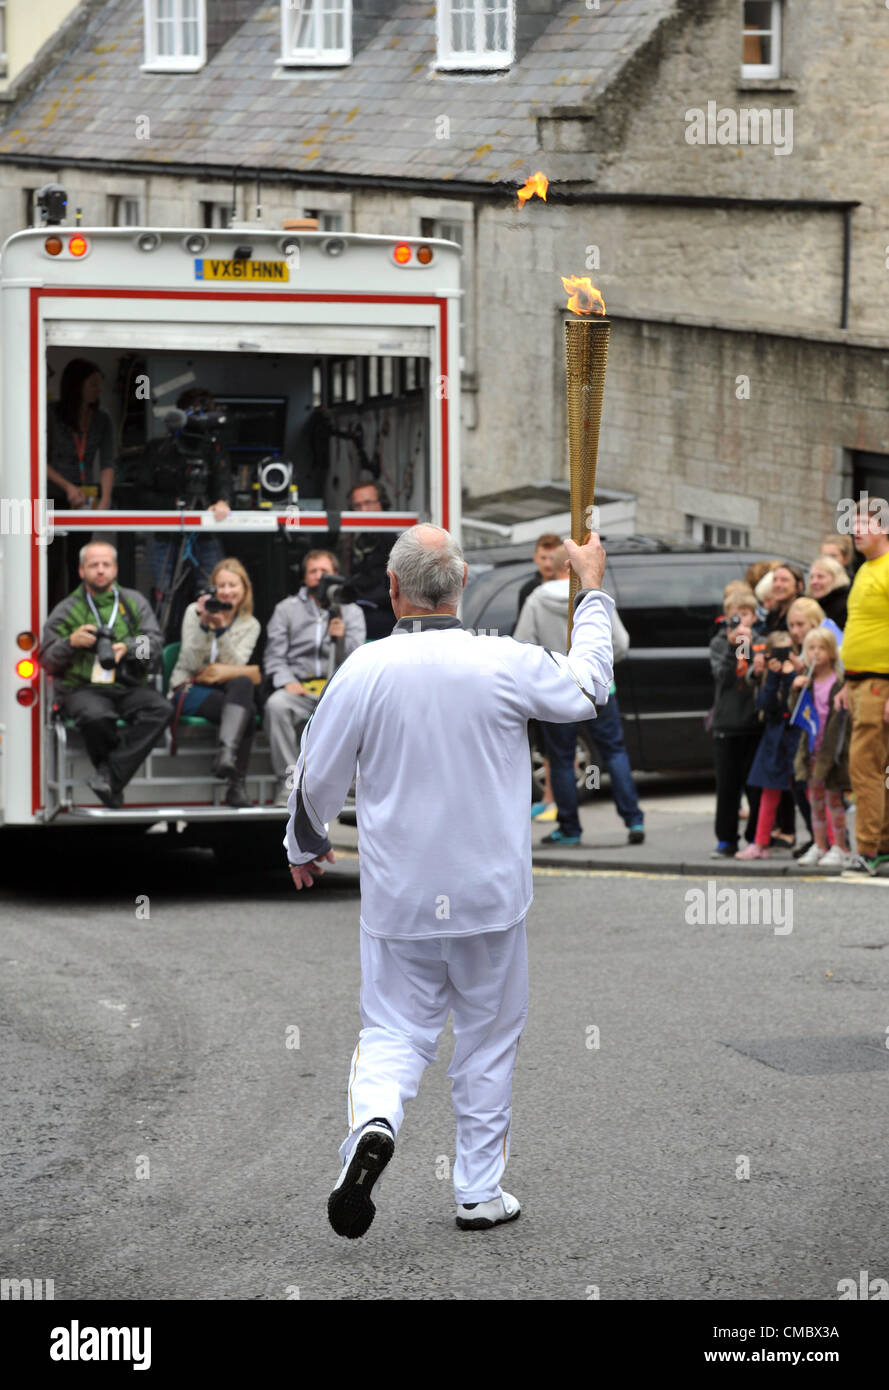 Day 56 of the torch relay around the UK…The torch passing through Fortuneswell, Portland in Dorset. Britain. 13/07/2012 PICTURE BY: DORSET MEDIA SERVICE Stock Photo